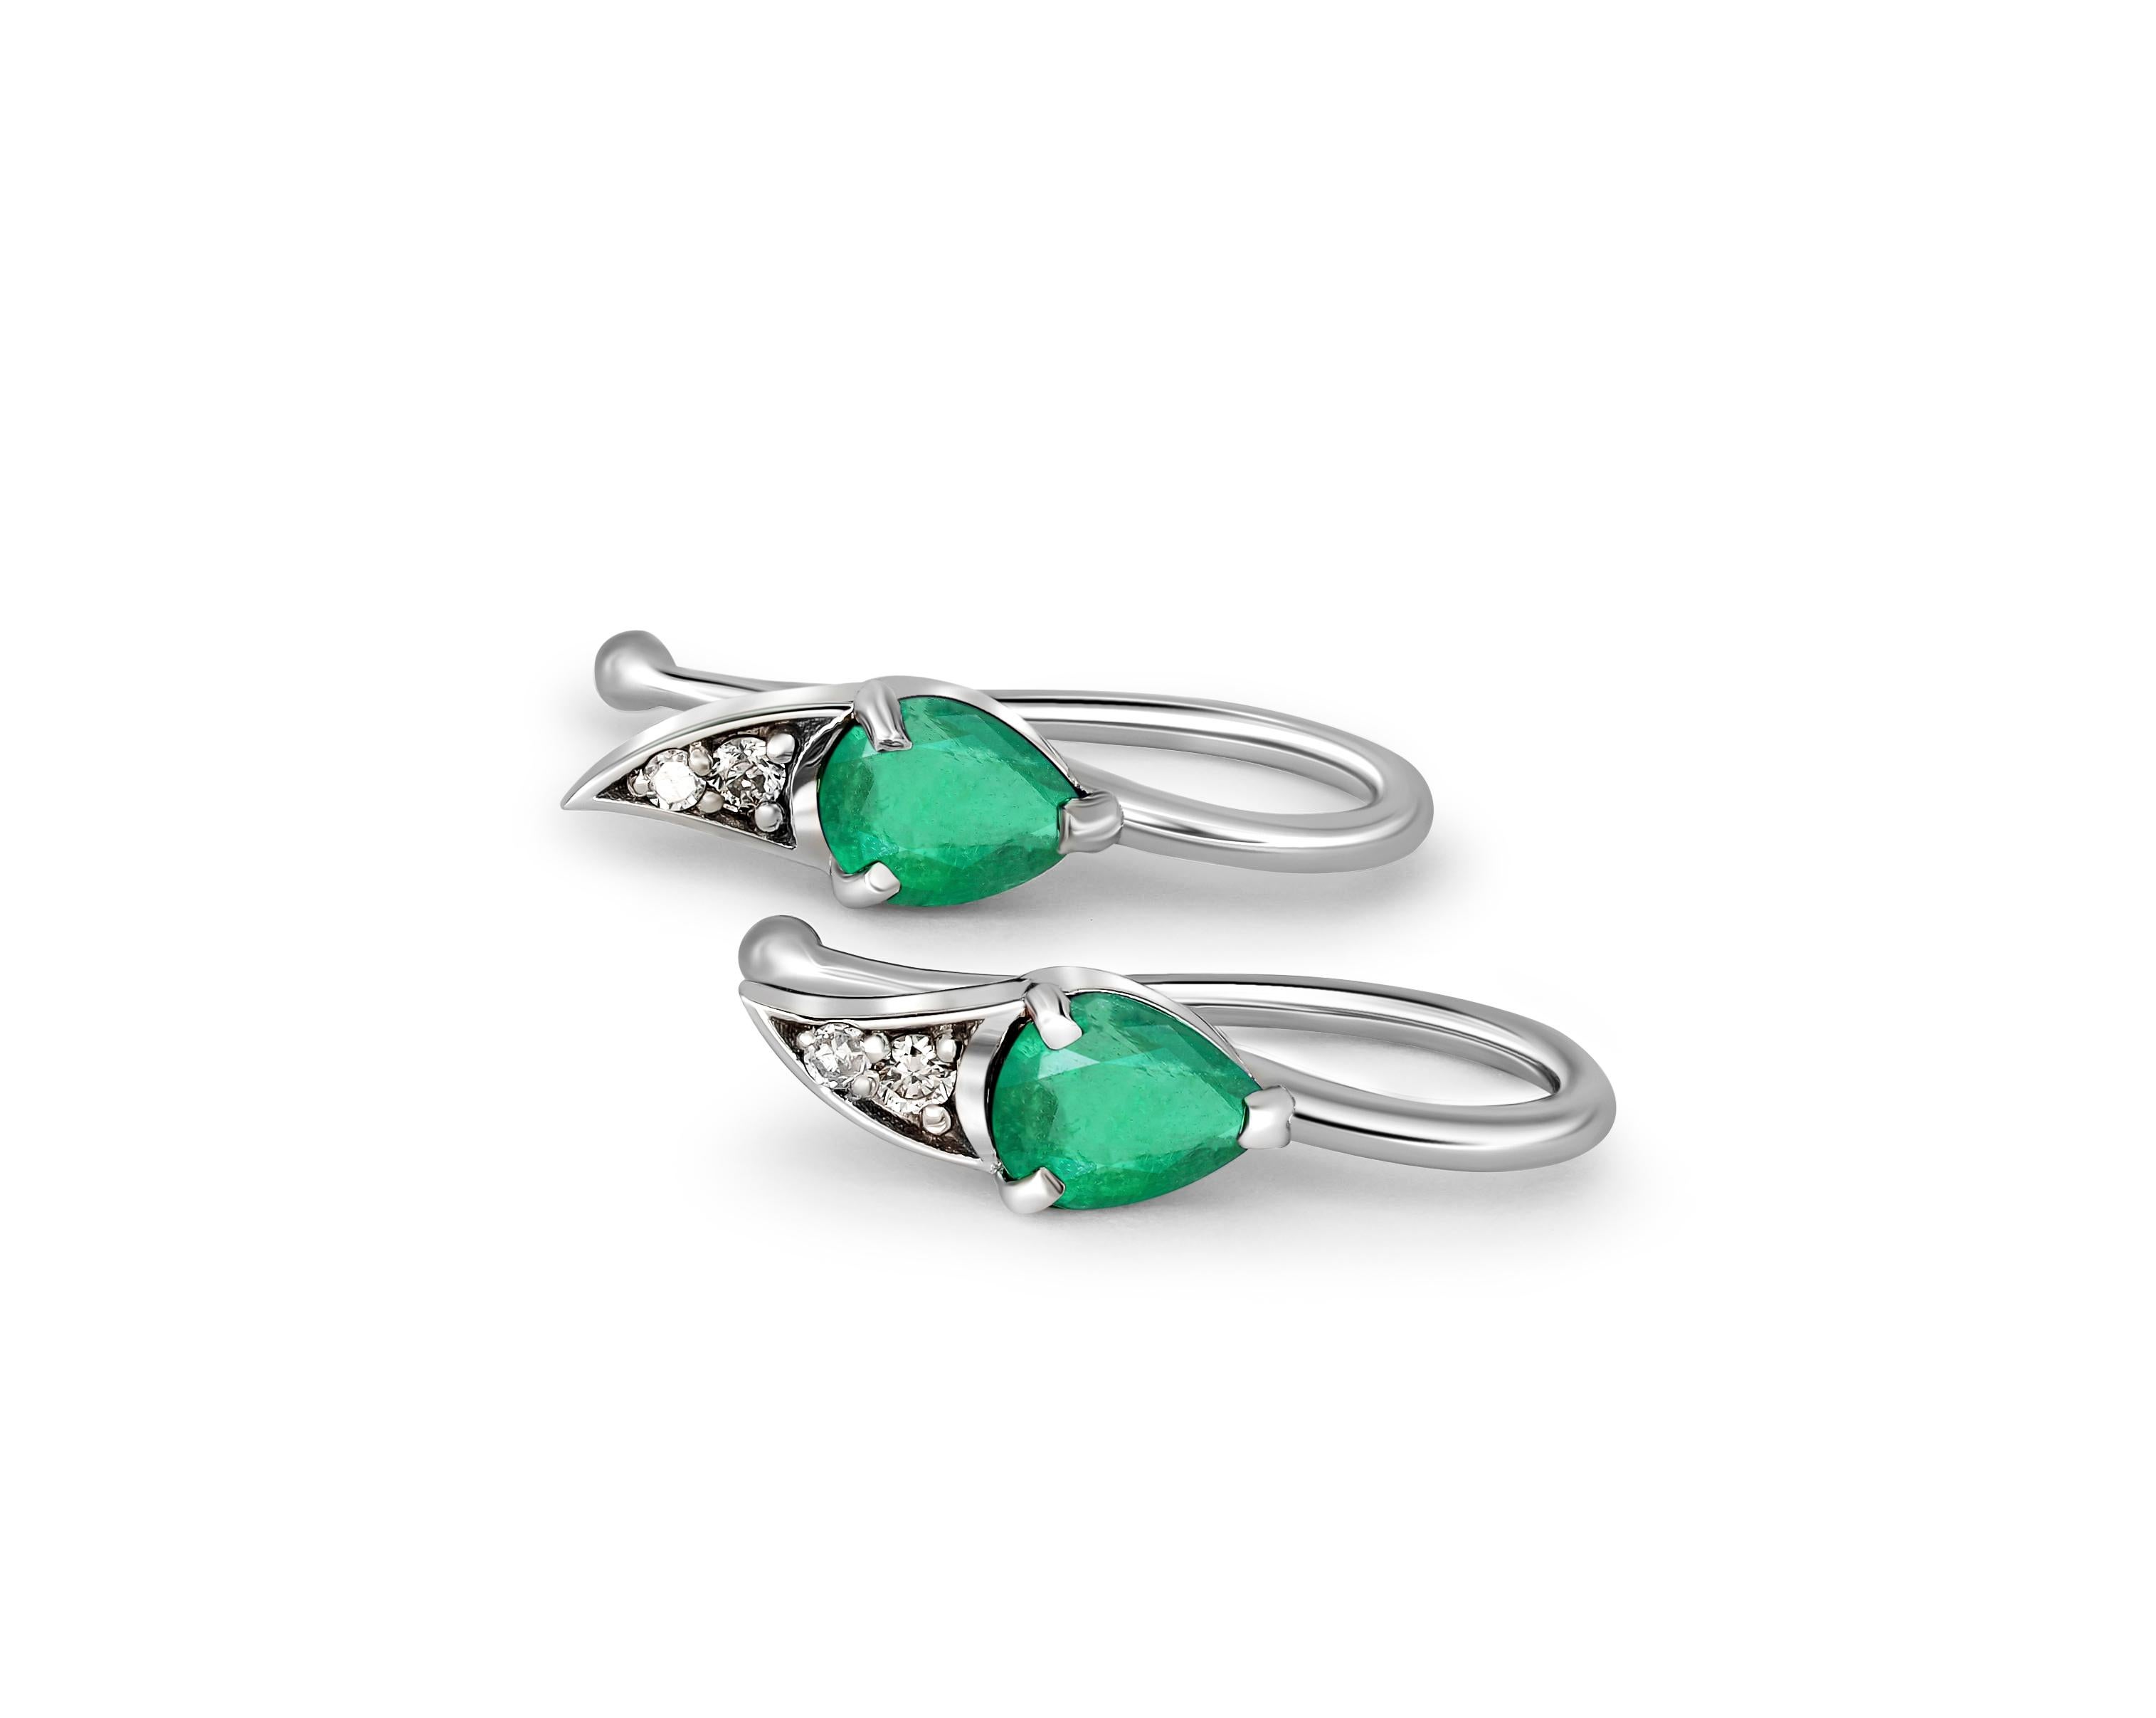 14k gold earrings with natural emerald and diamonds. Minimalist emerald earrings. Emerald gold earrings. Pear emerald earrings.

Weight: 1.5 g.
Size: 16.5 x 4.5 mm.

Central stones: 
Natural emerald: weight - 1 ct total, 2 pieces.
Pear cut, green